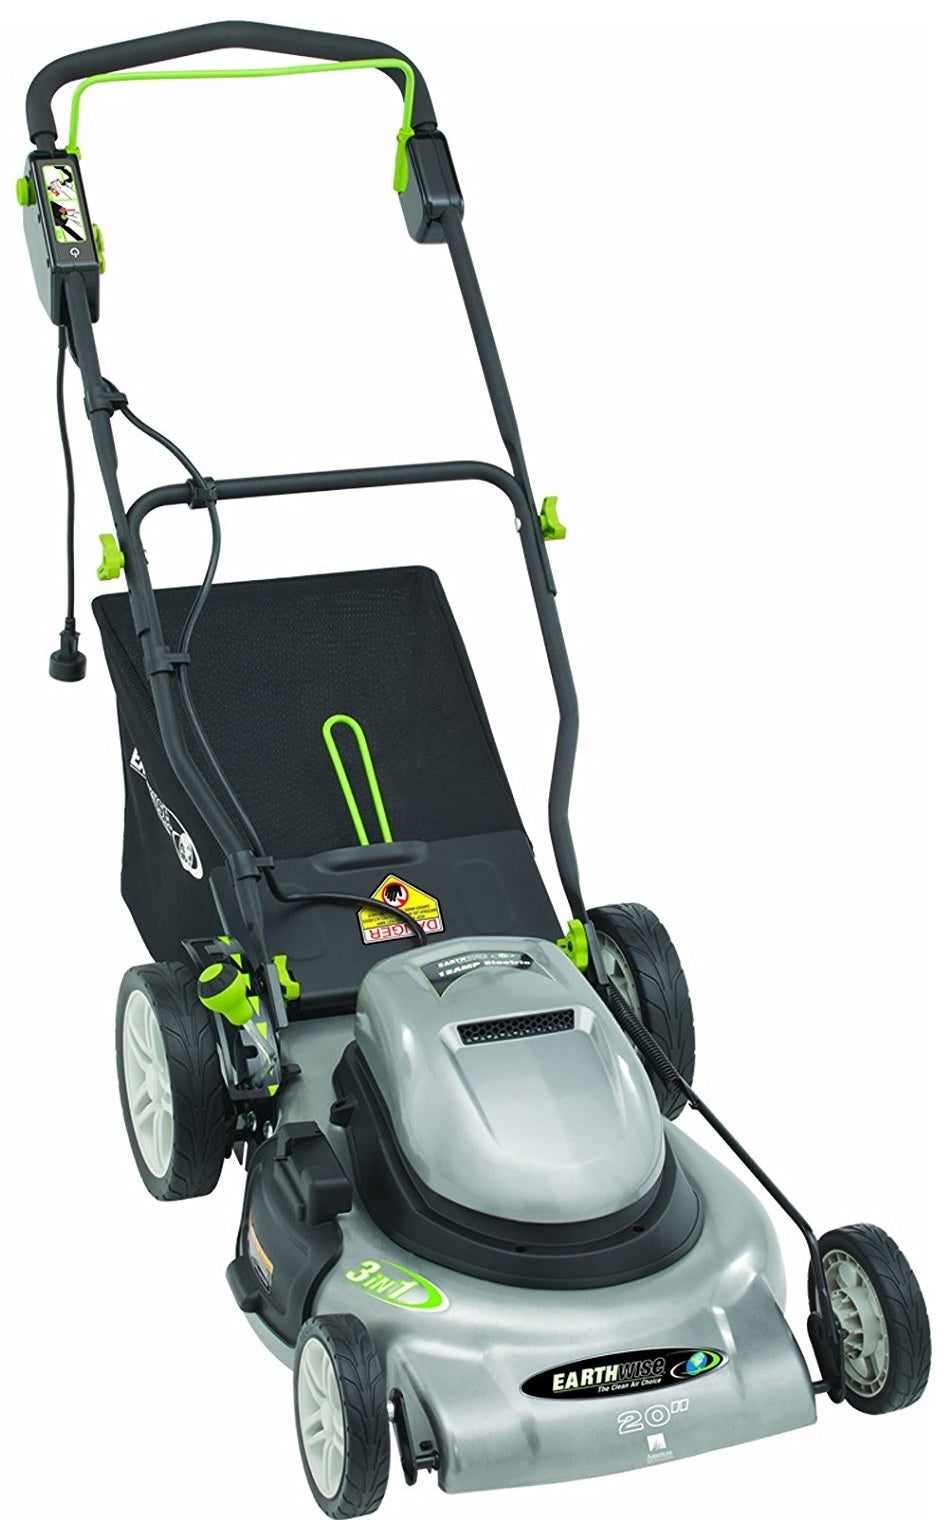 Buy earthwise 50520 - Online store for lawn power equipment, electric mowers in USA, on sale, low price, discount deals, coupon code